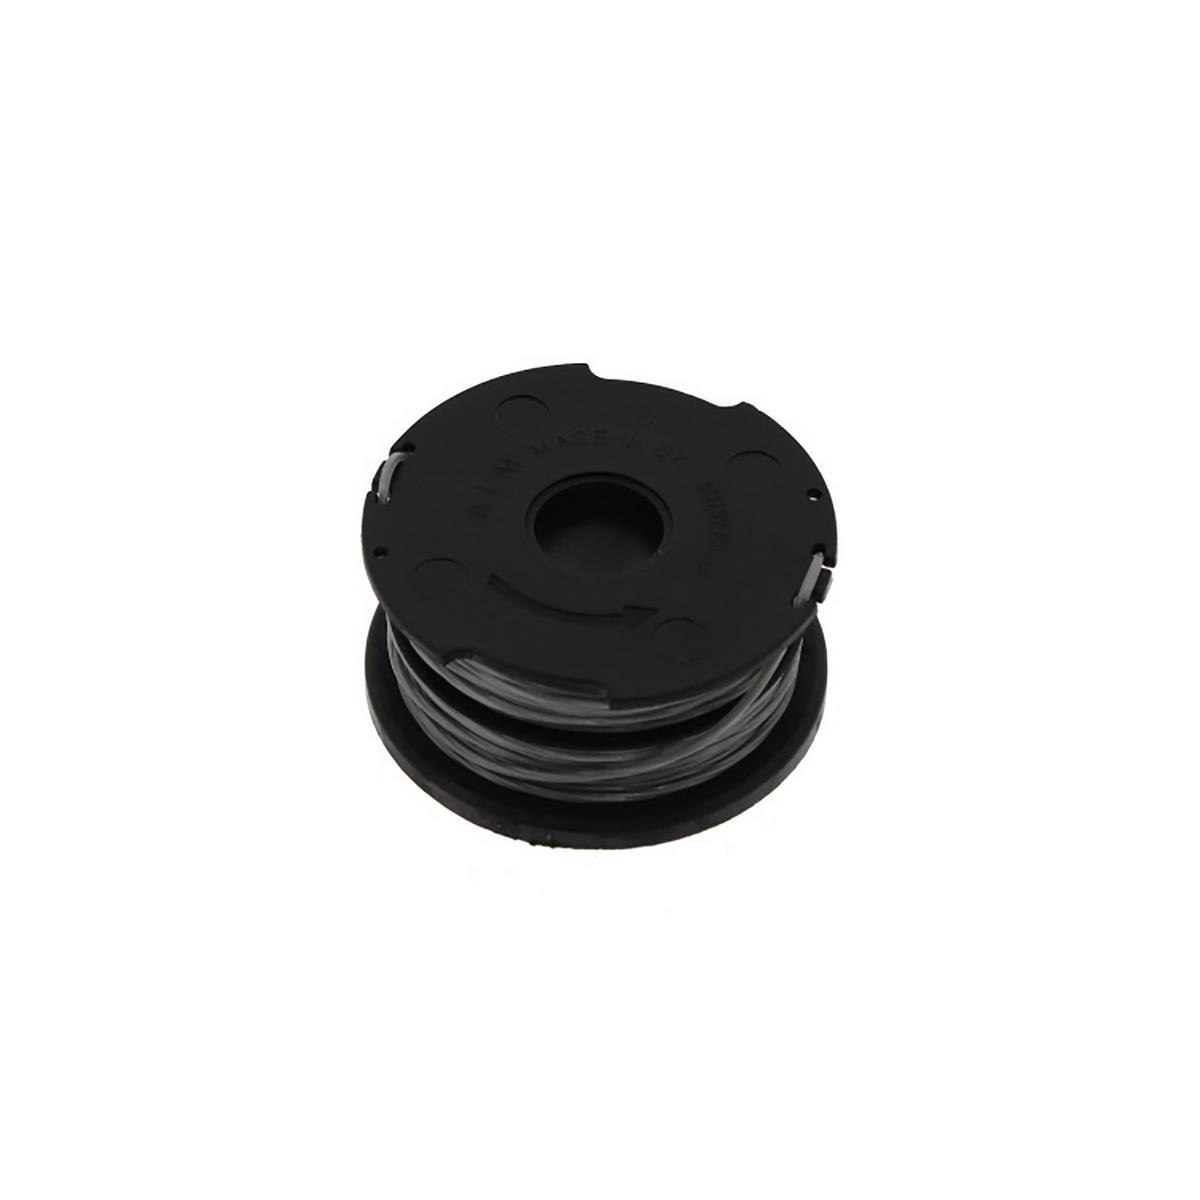 Replacement Spool for Black and Decker Reflex Plus Trimmers